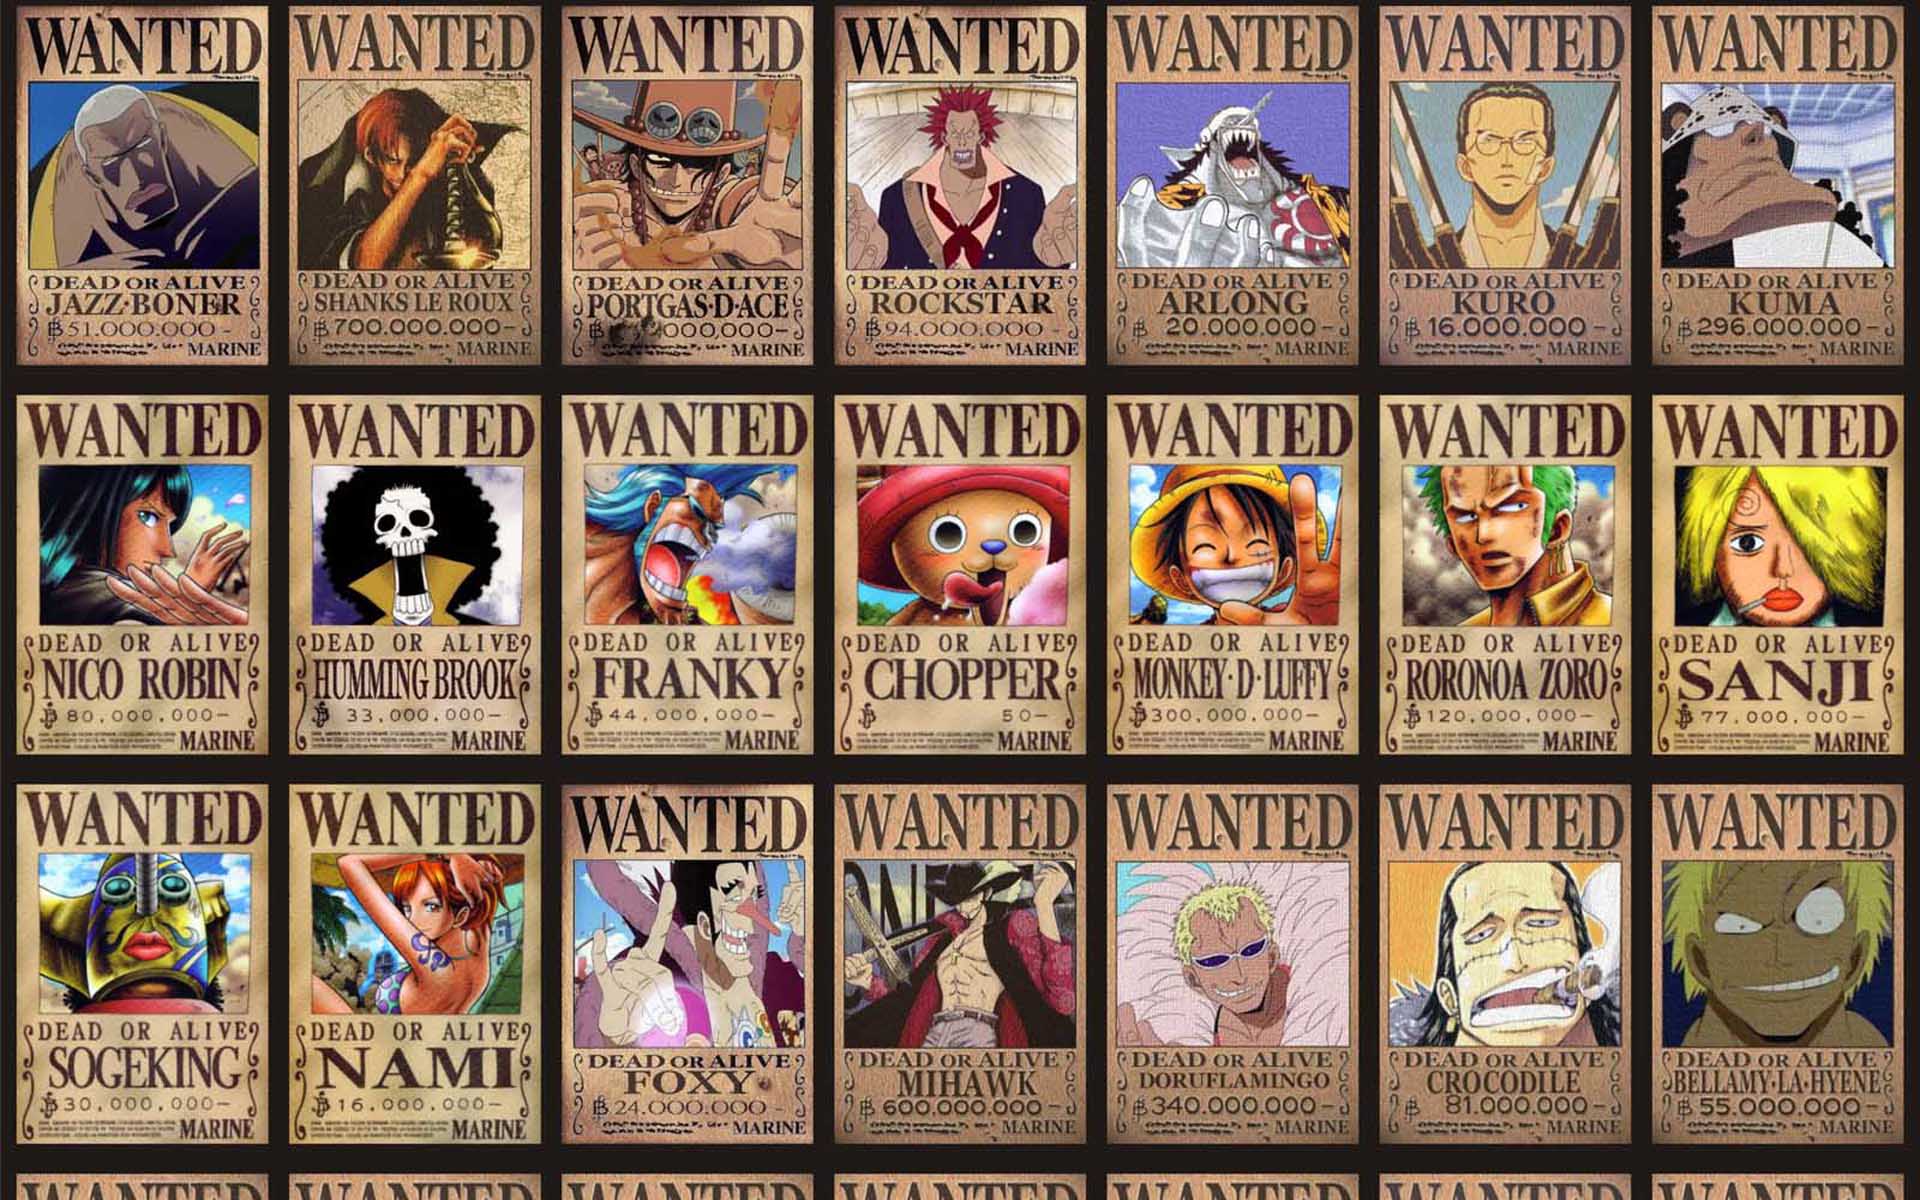 One Piece Wanted Posters Hd Wallpaper